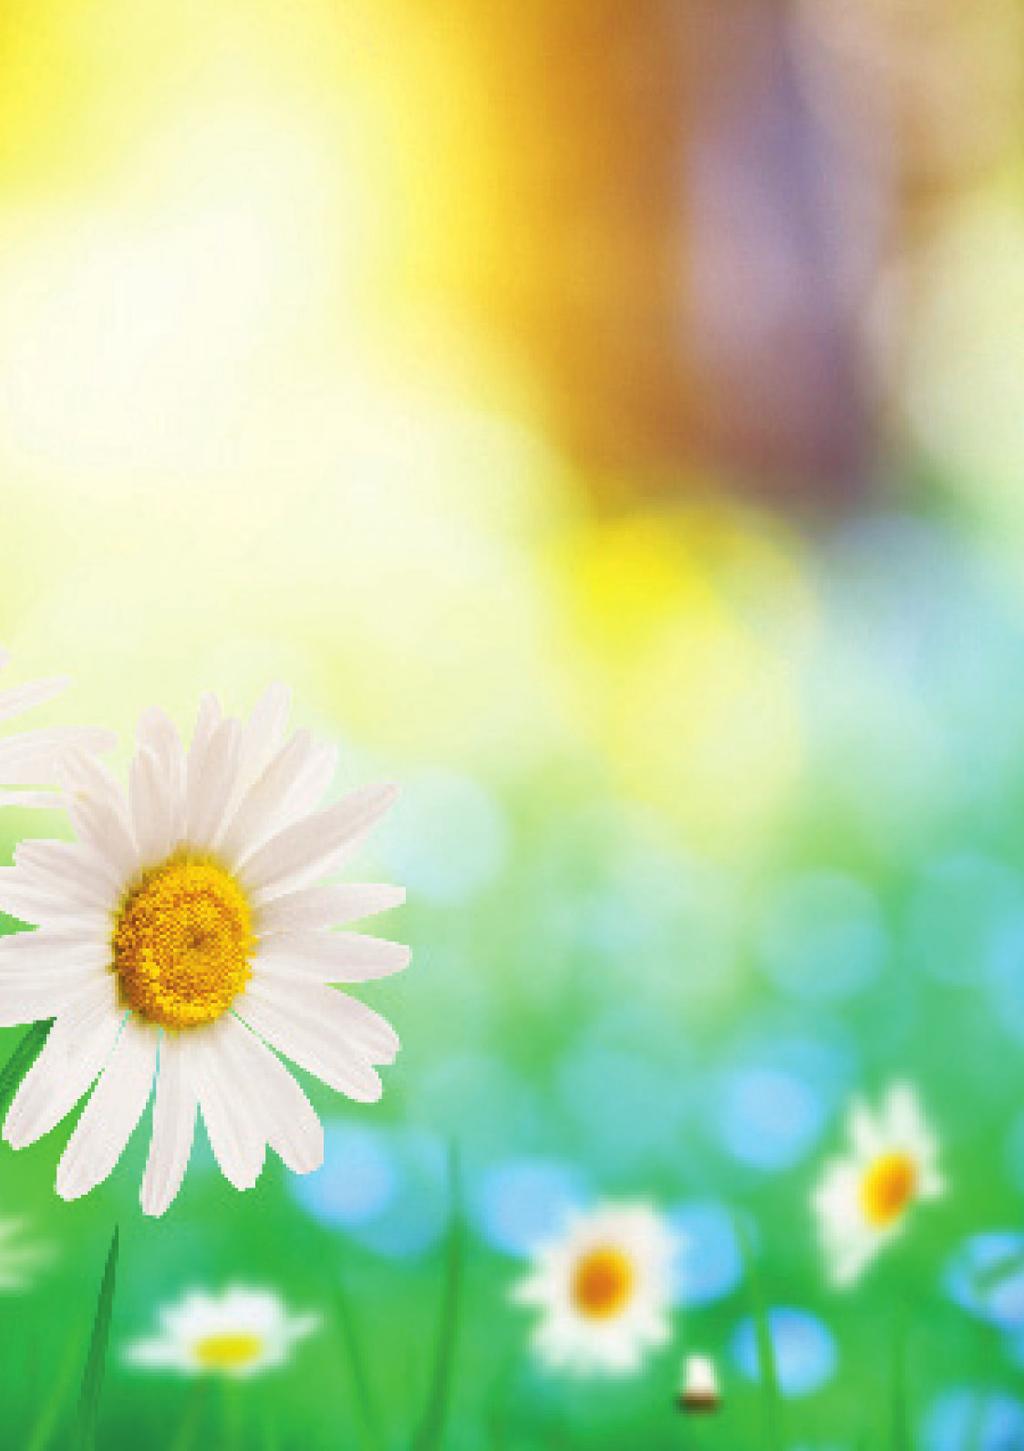 Age UK LPFA Pensioner spring newsletter Age UK offers information and advice across a range of free guides that help to answer many questions on issue affecting people aged 60 years and over.